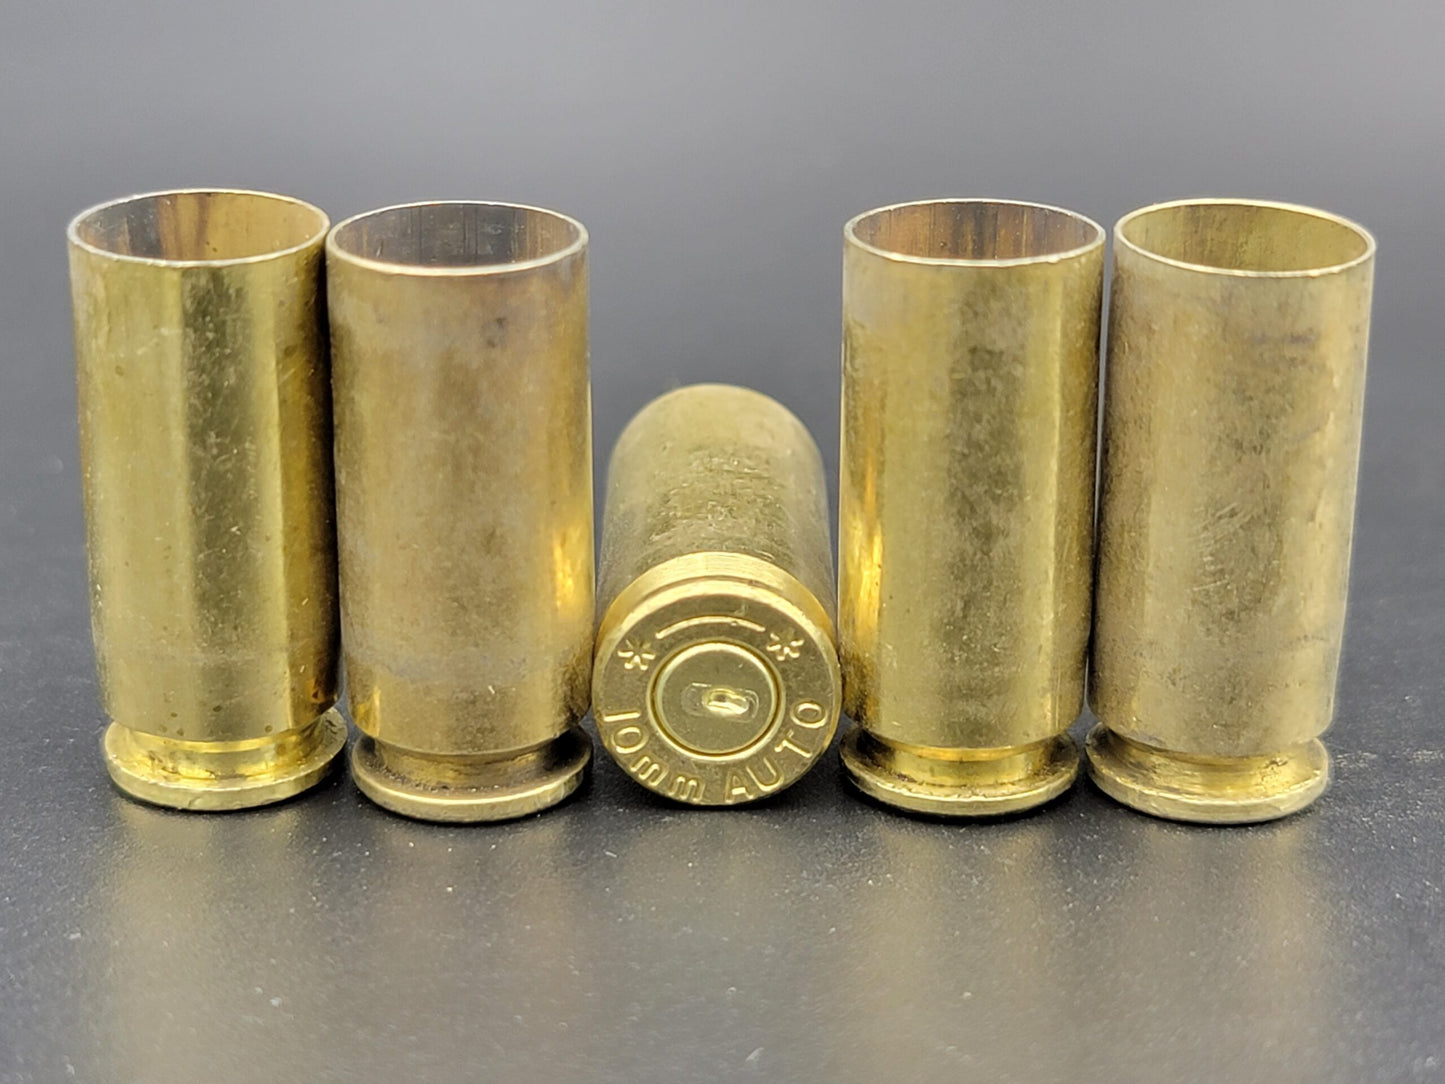 10mm once fired pistol brass. Hand sorted from reputable indoor/military ranges for reloading. Reliable spent casings for precision shooting.